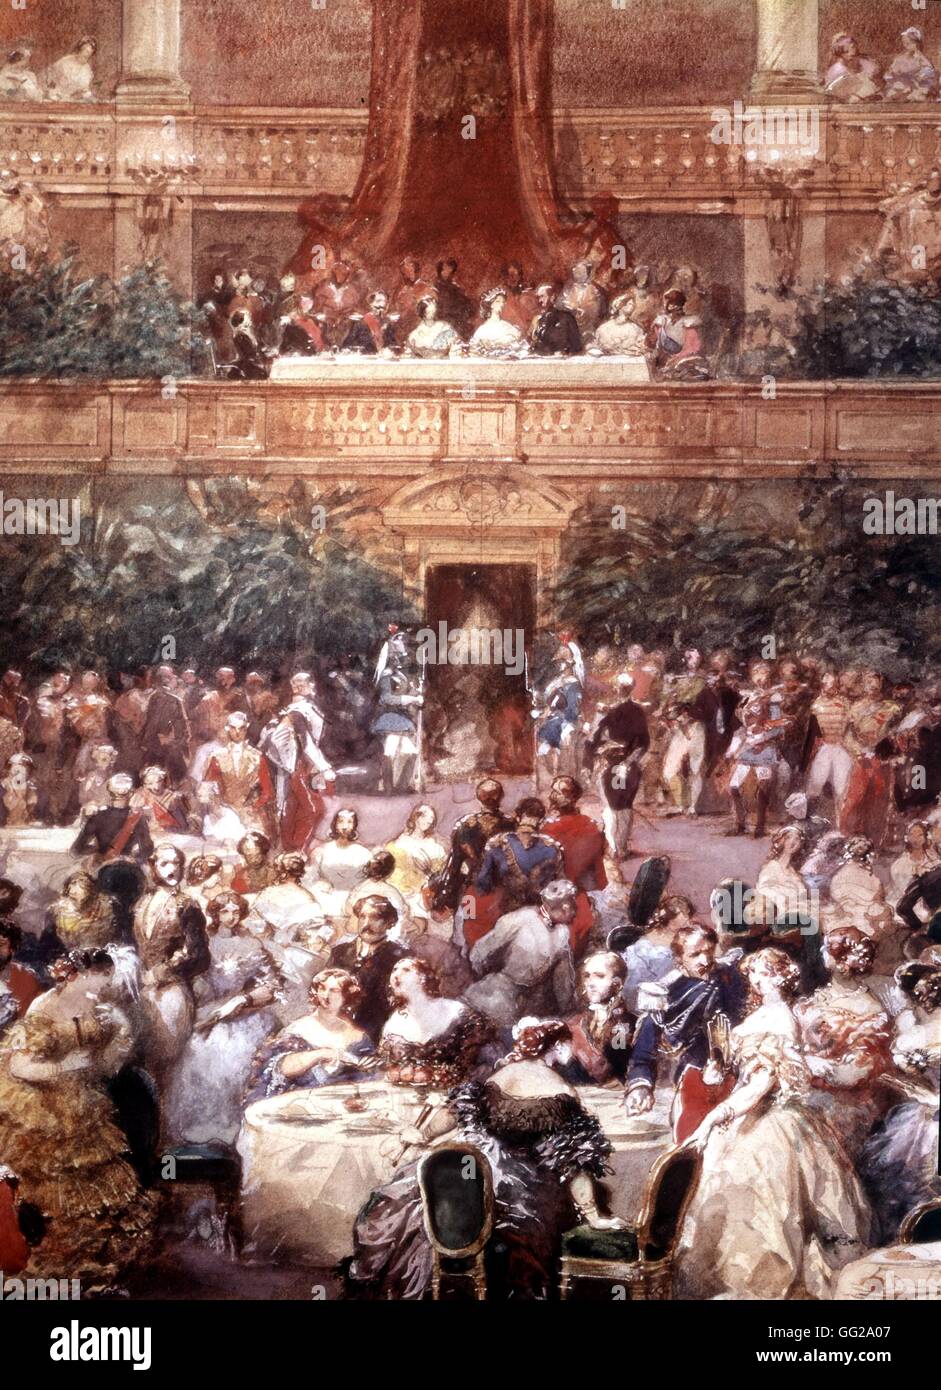 Eugène Lami (1800-1890) Supper given in honour of Queen Victoria in the reception room at Versailles castle, August 25, 1853 19th century France Musée de Versailles Stock Photo